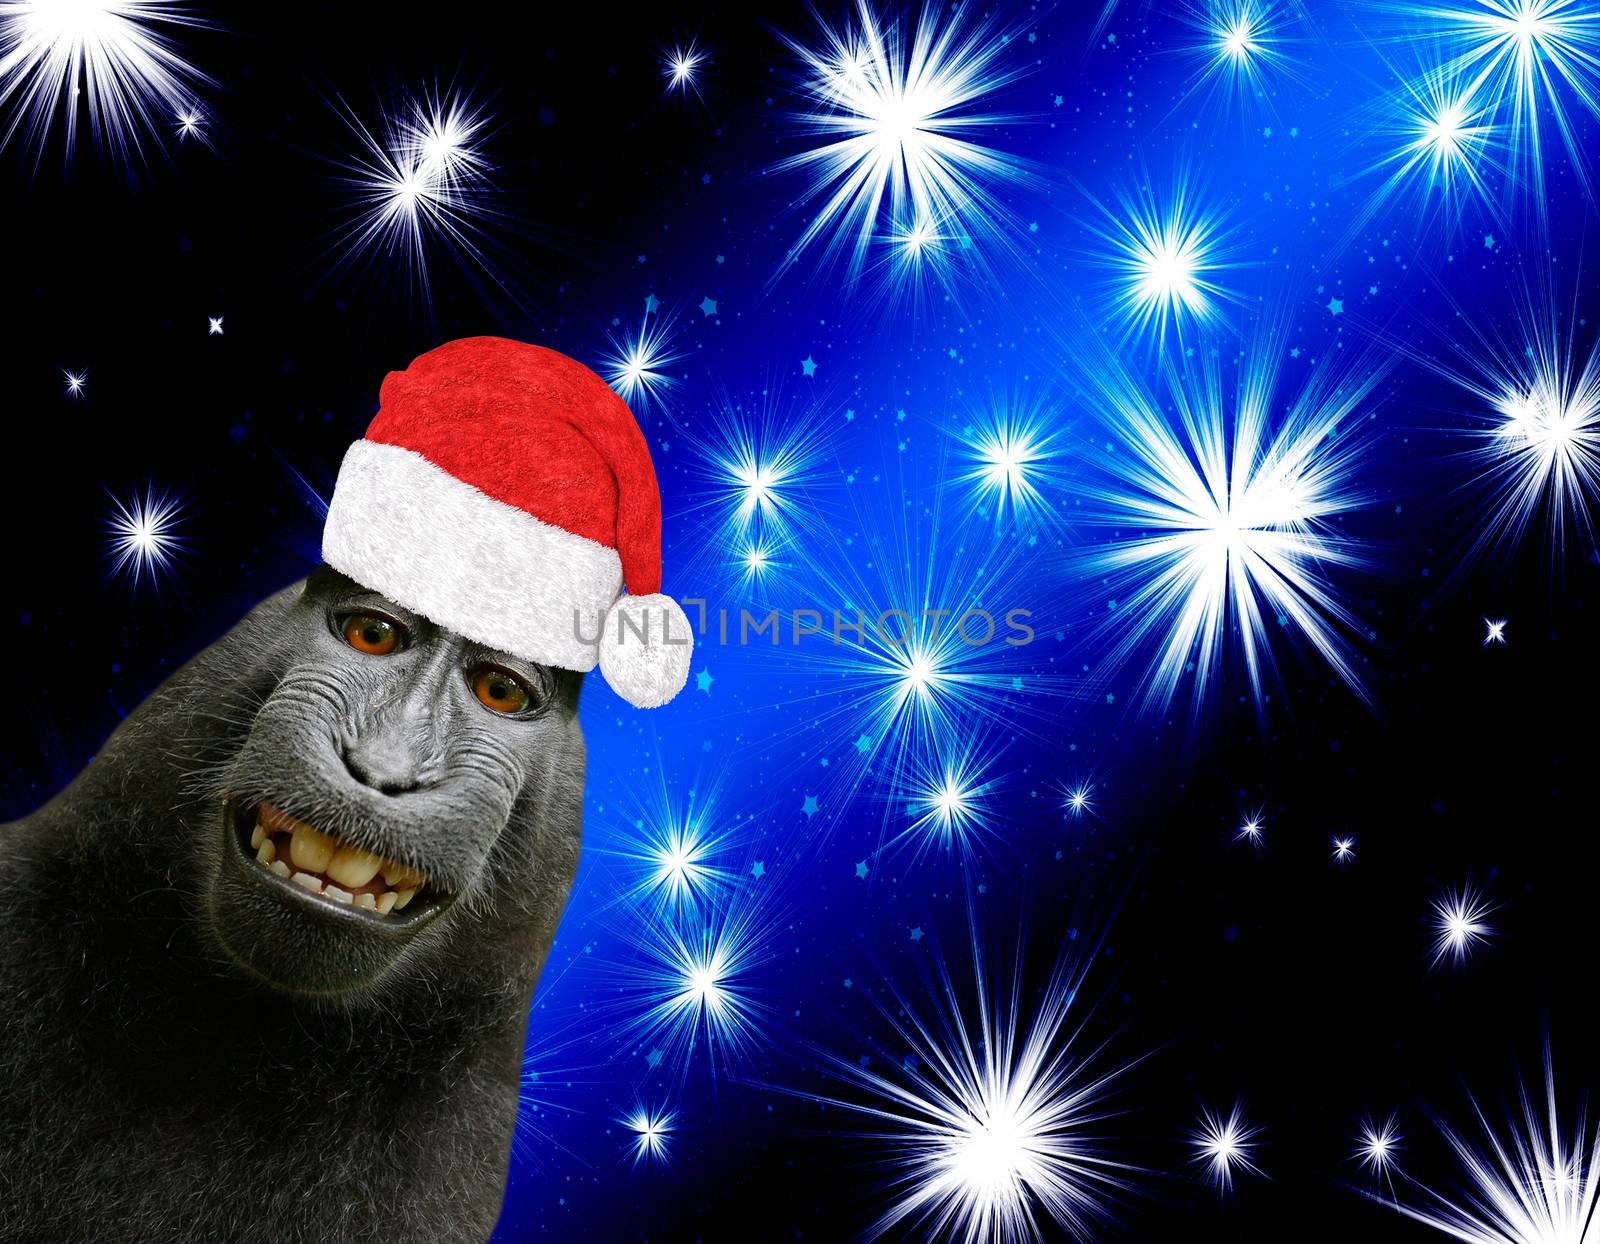 Merry christmas card a funny chimpanzee monkey wearing a santa claus bonnet isolated on a black and blue background with shining bright stars by charlottebleijenberg